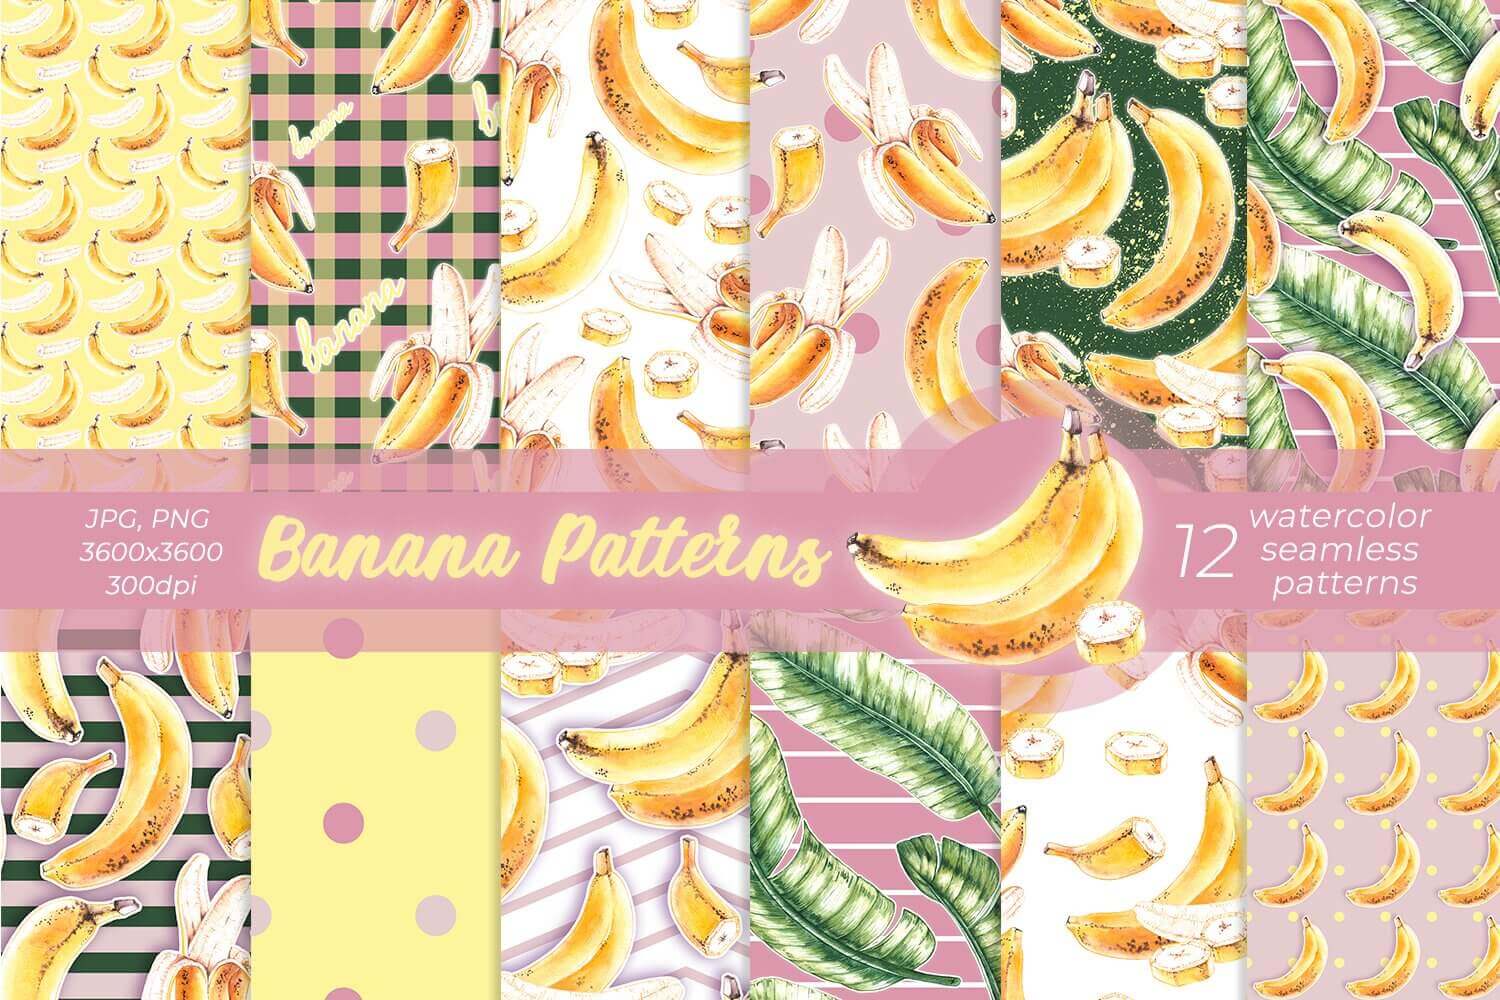 12 watercolor patterns with the image of yellow bananas.